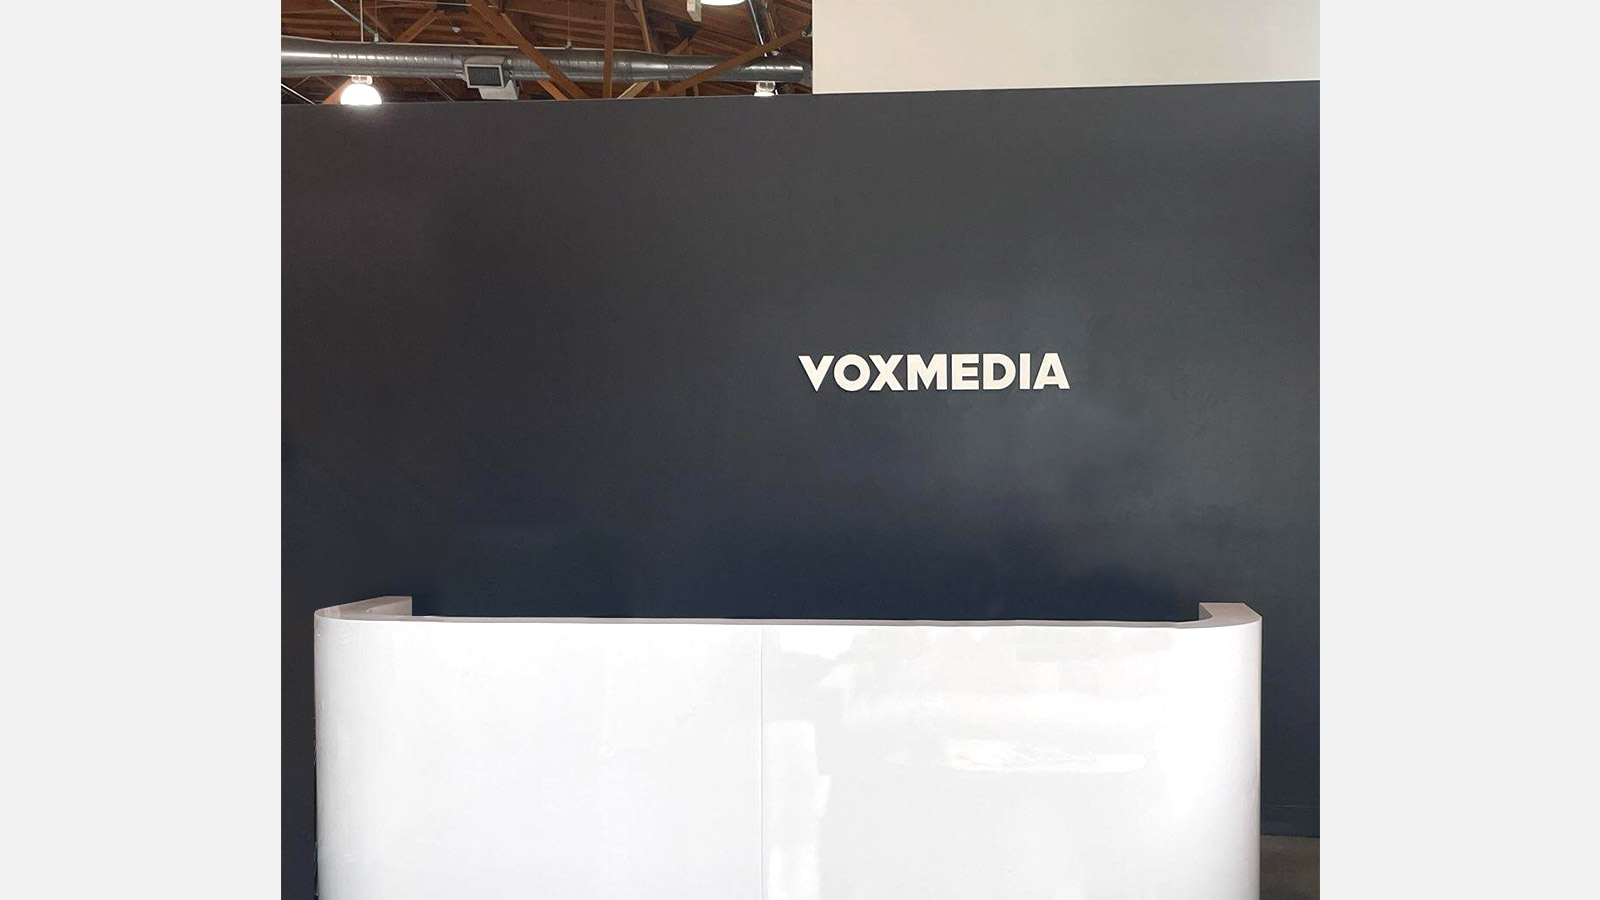 vox media lobby sign installed on the wall